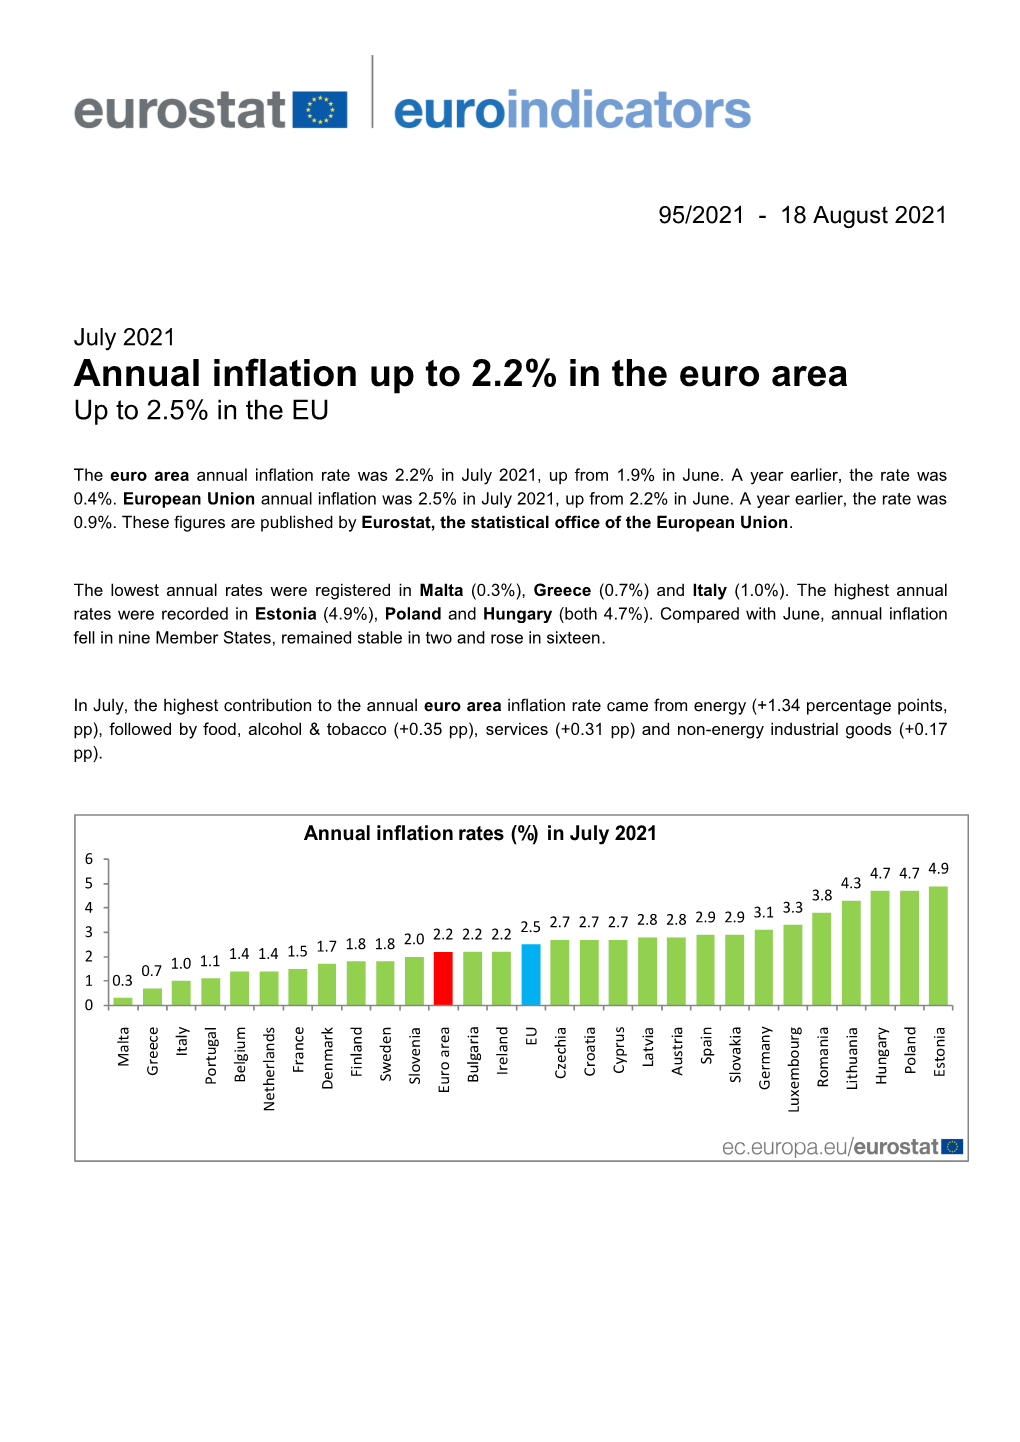 Annual Inflation up to 2.2% in the Euro Area up to 2.5% in the EU